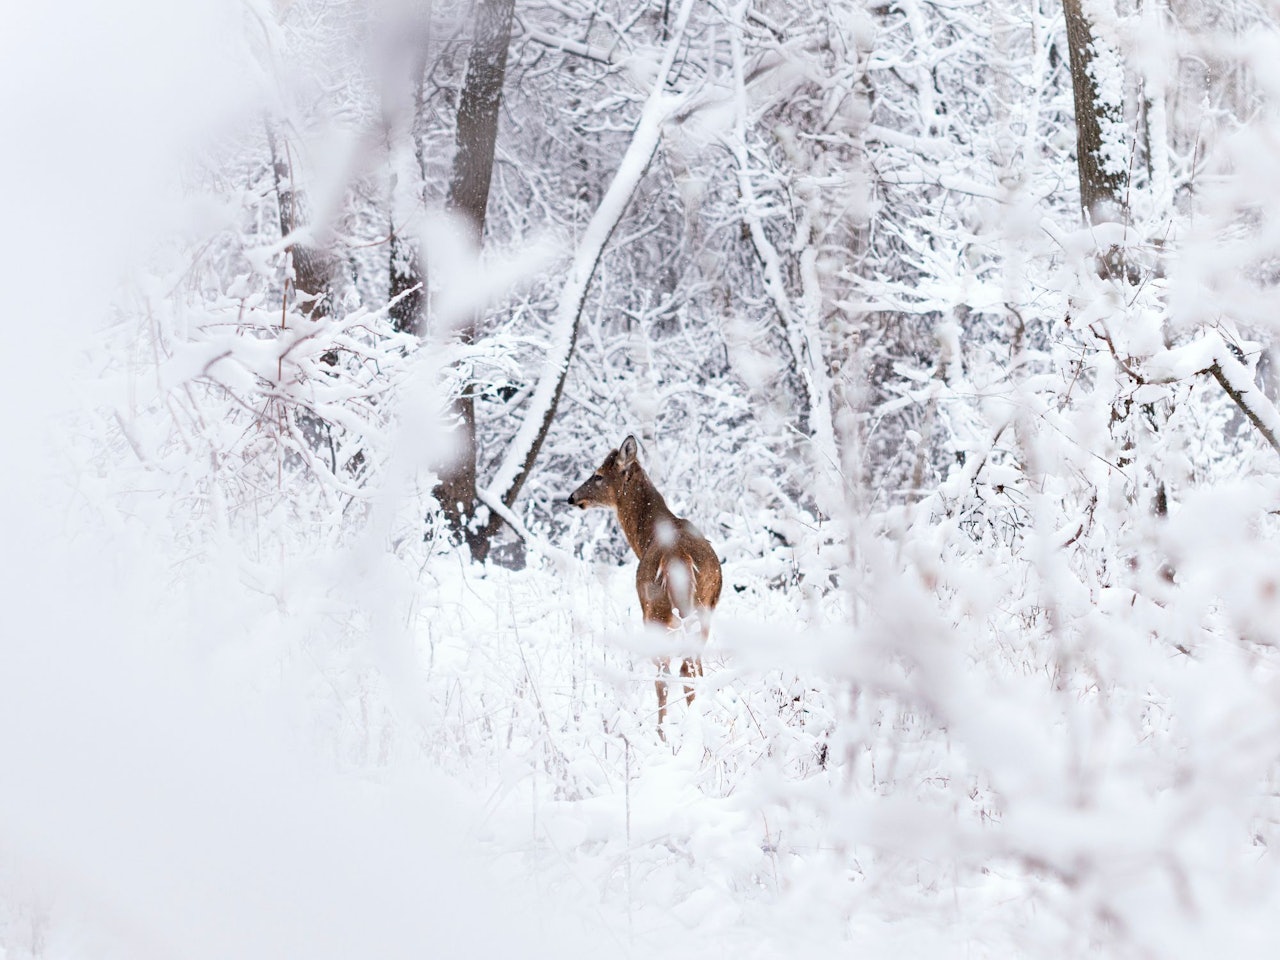 Deer in the Snow by Aaron Huber for Conscious by Chloé